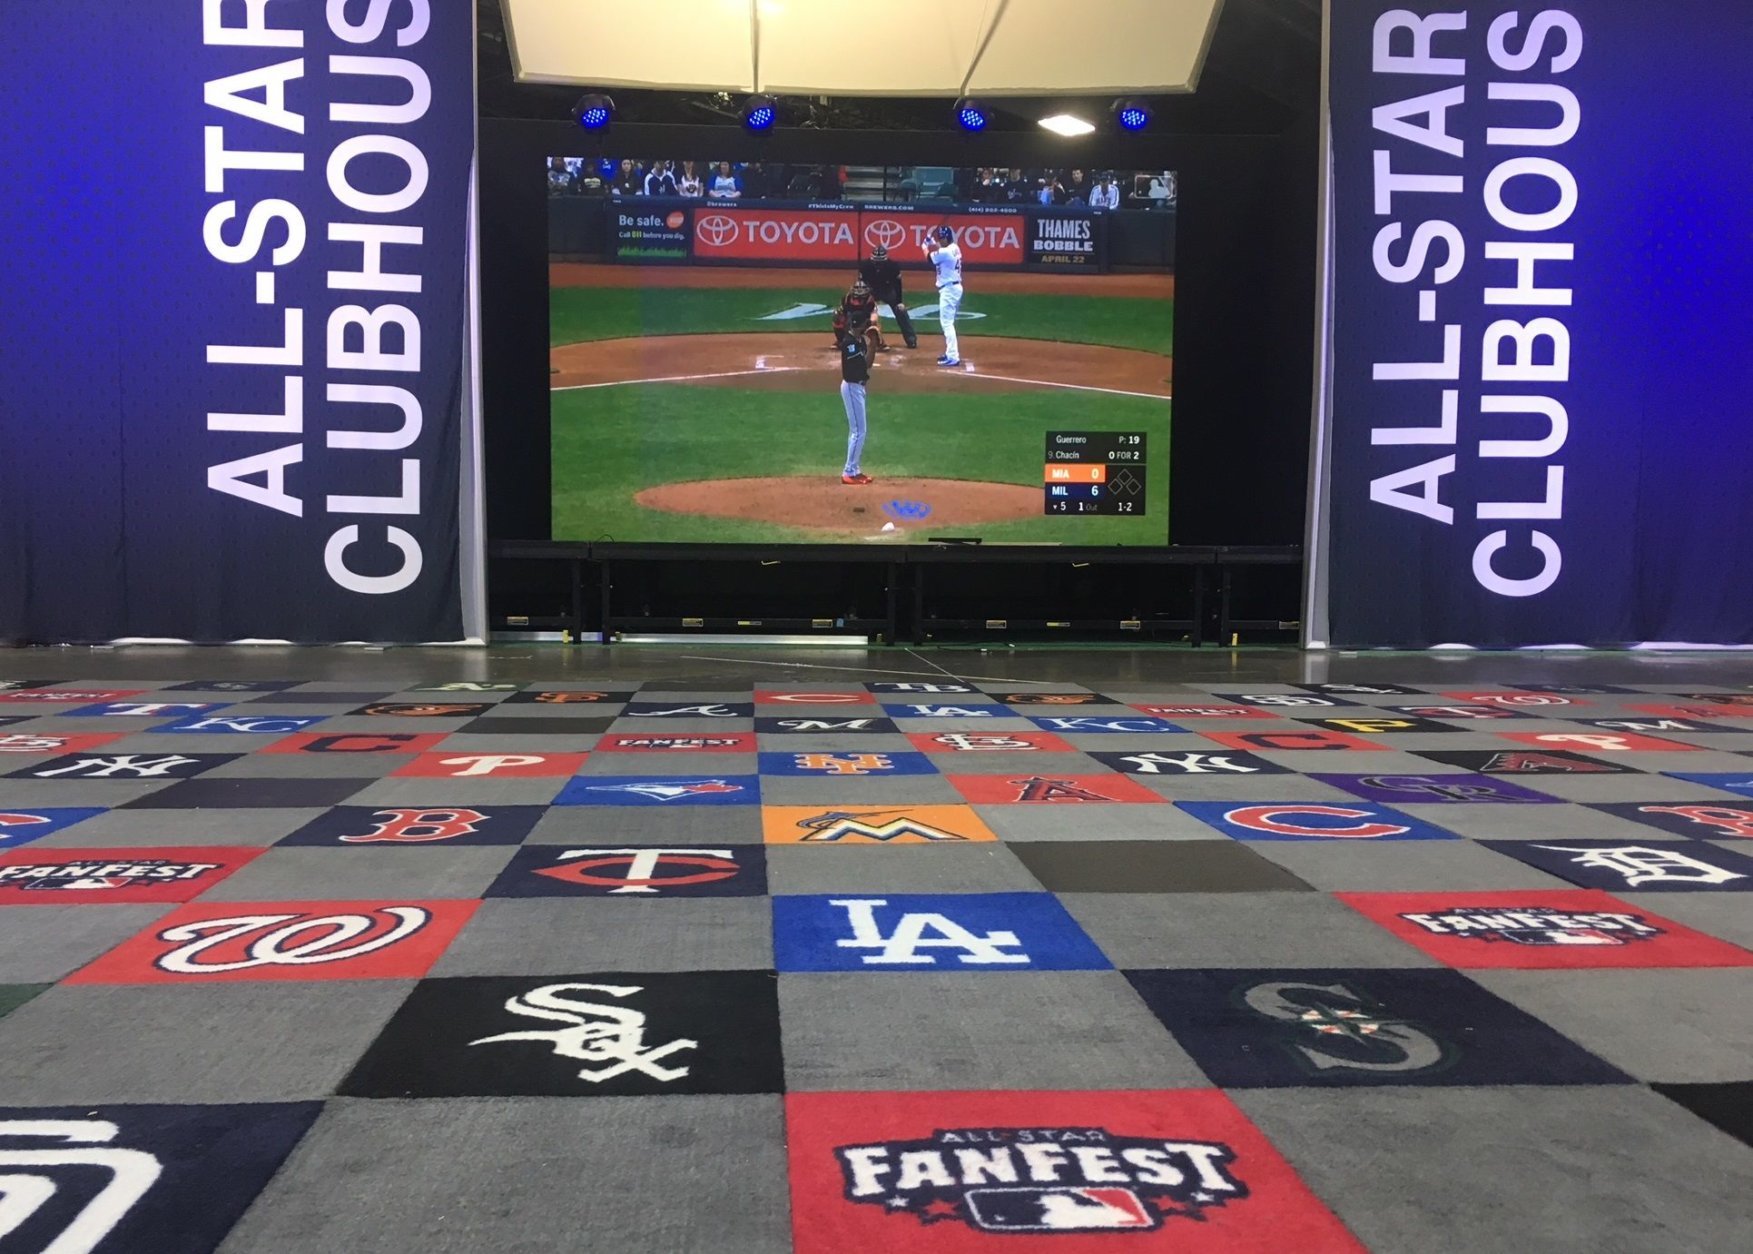 2016 MLB All-Star Game Art Collection on Display at Fanfest